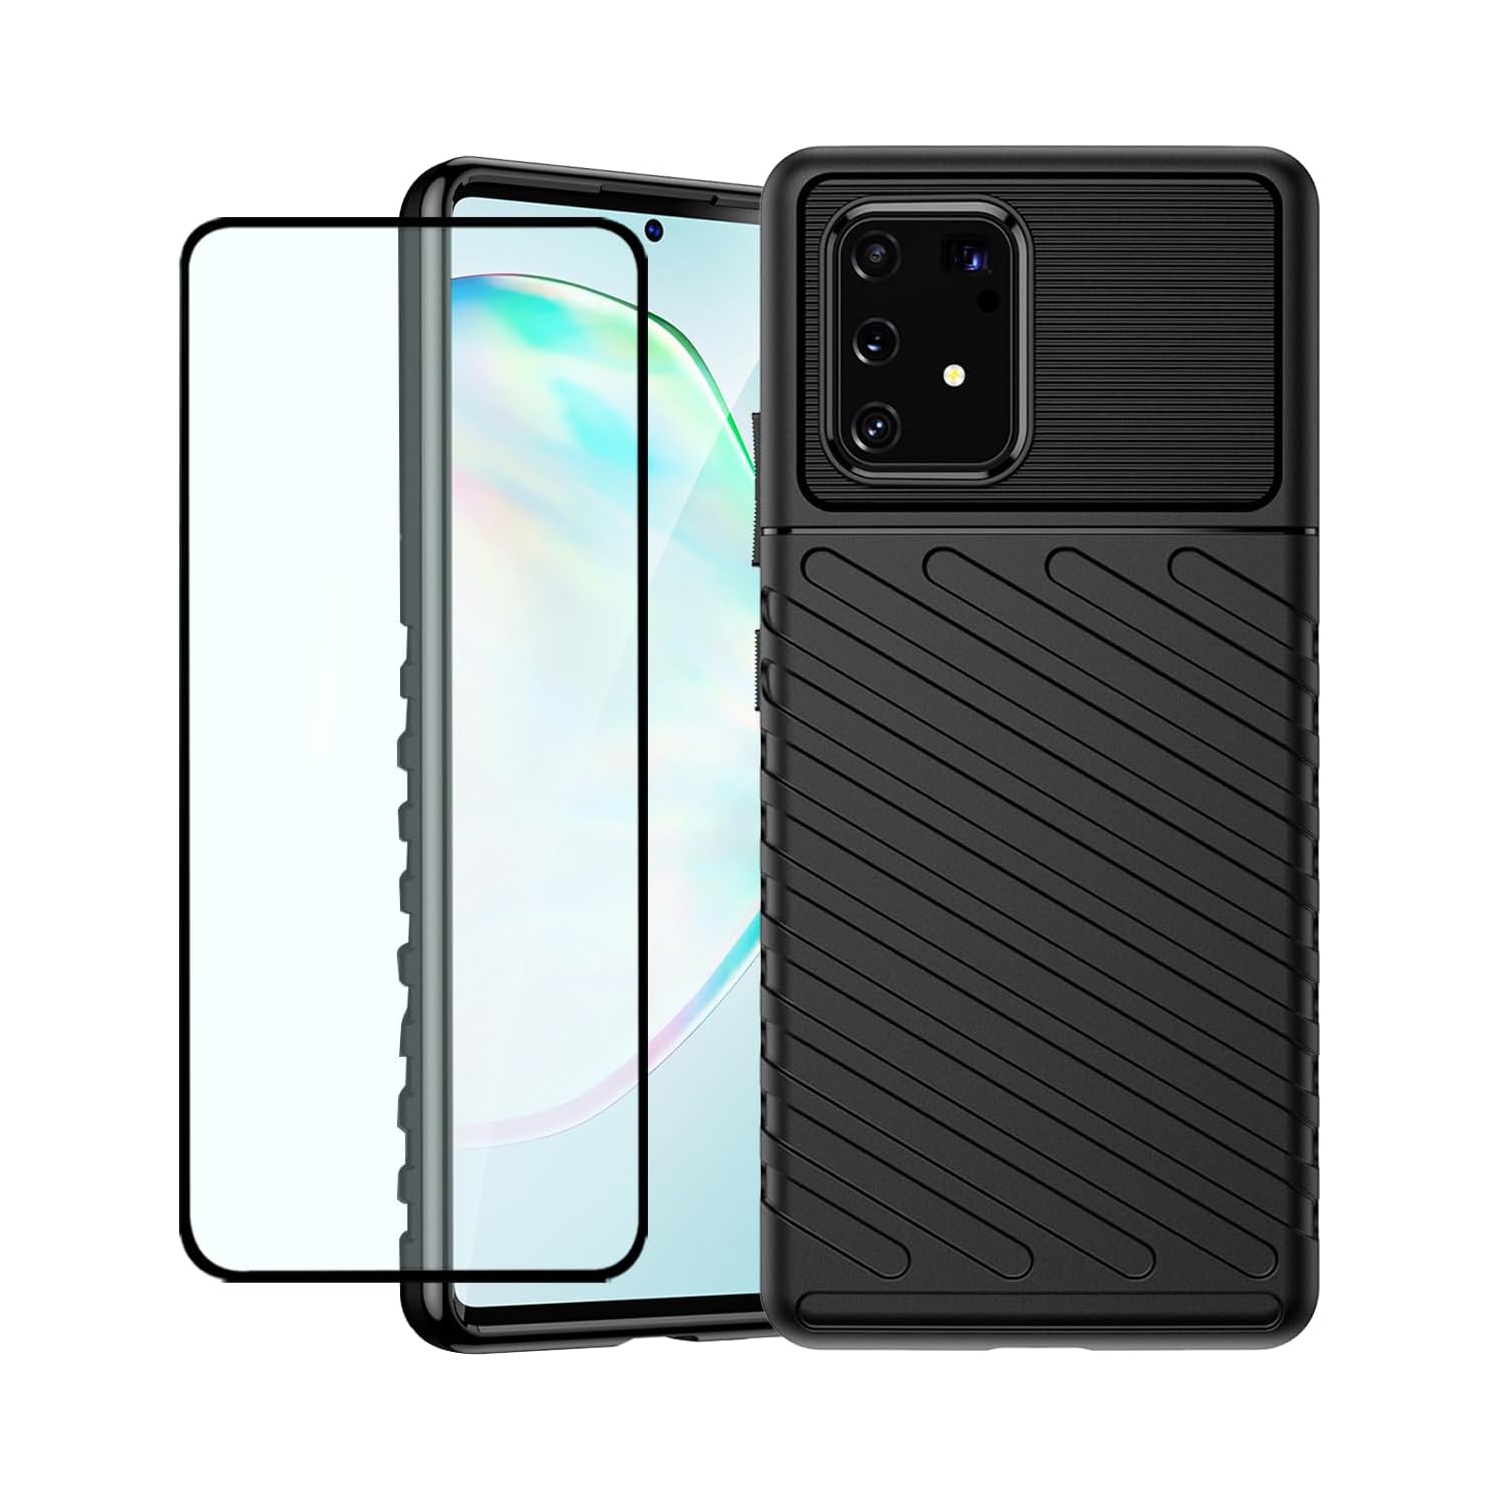 Phone Case for Galaxy Note 10 Lite/A81/Galaxy M60S SM-N770F Case with Screen Protector, Carbon Fiber Shockproof